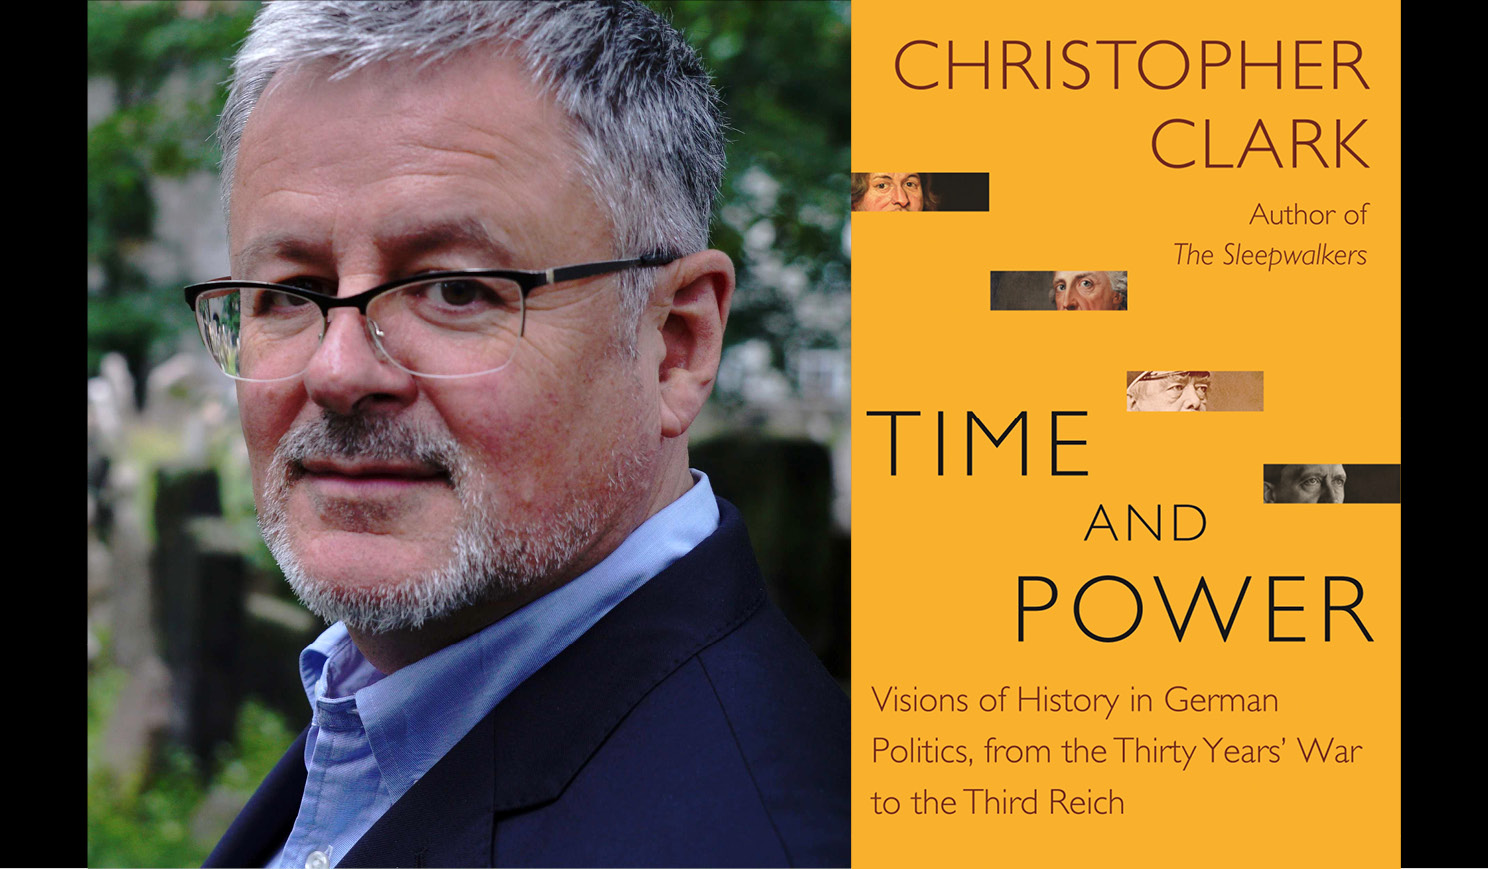 Christopher Clark's headshot alongside the cover of his book Time and Power